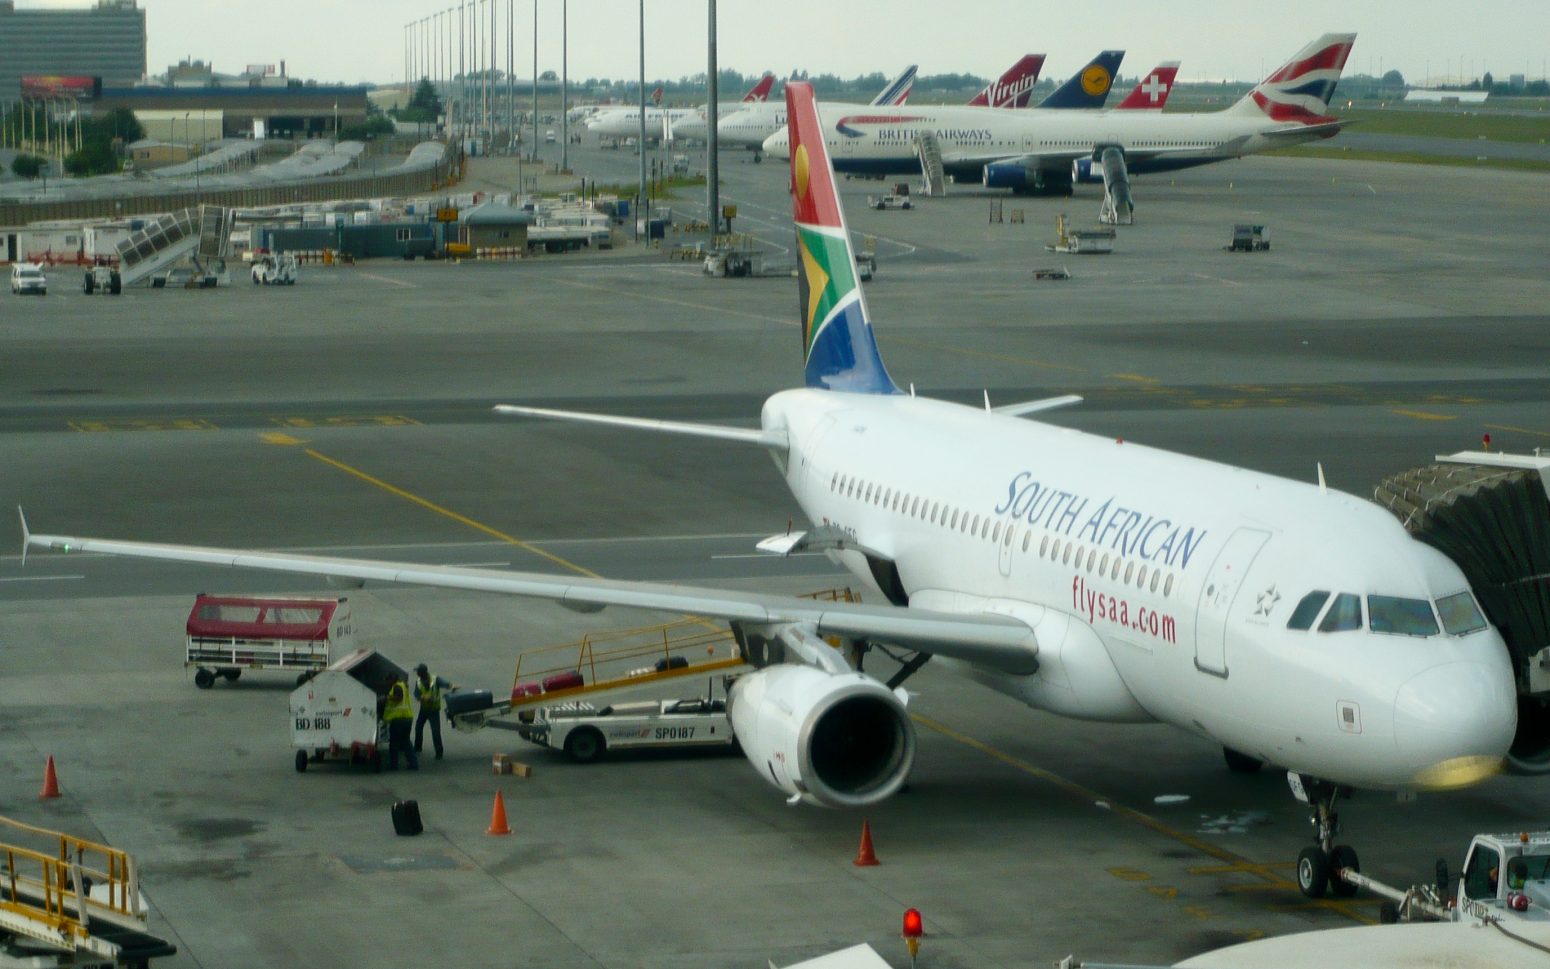 SAA aircraft up for sale